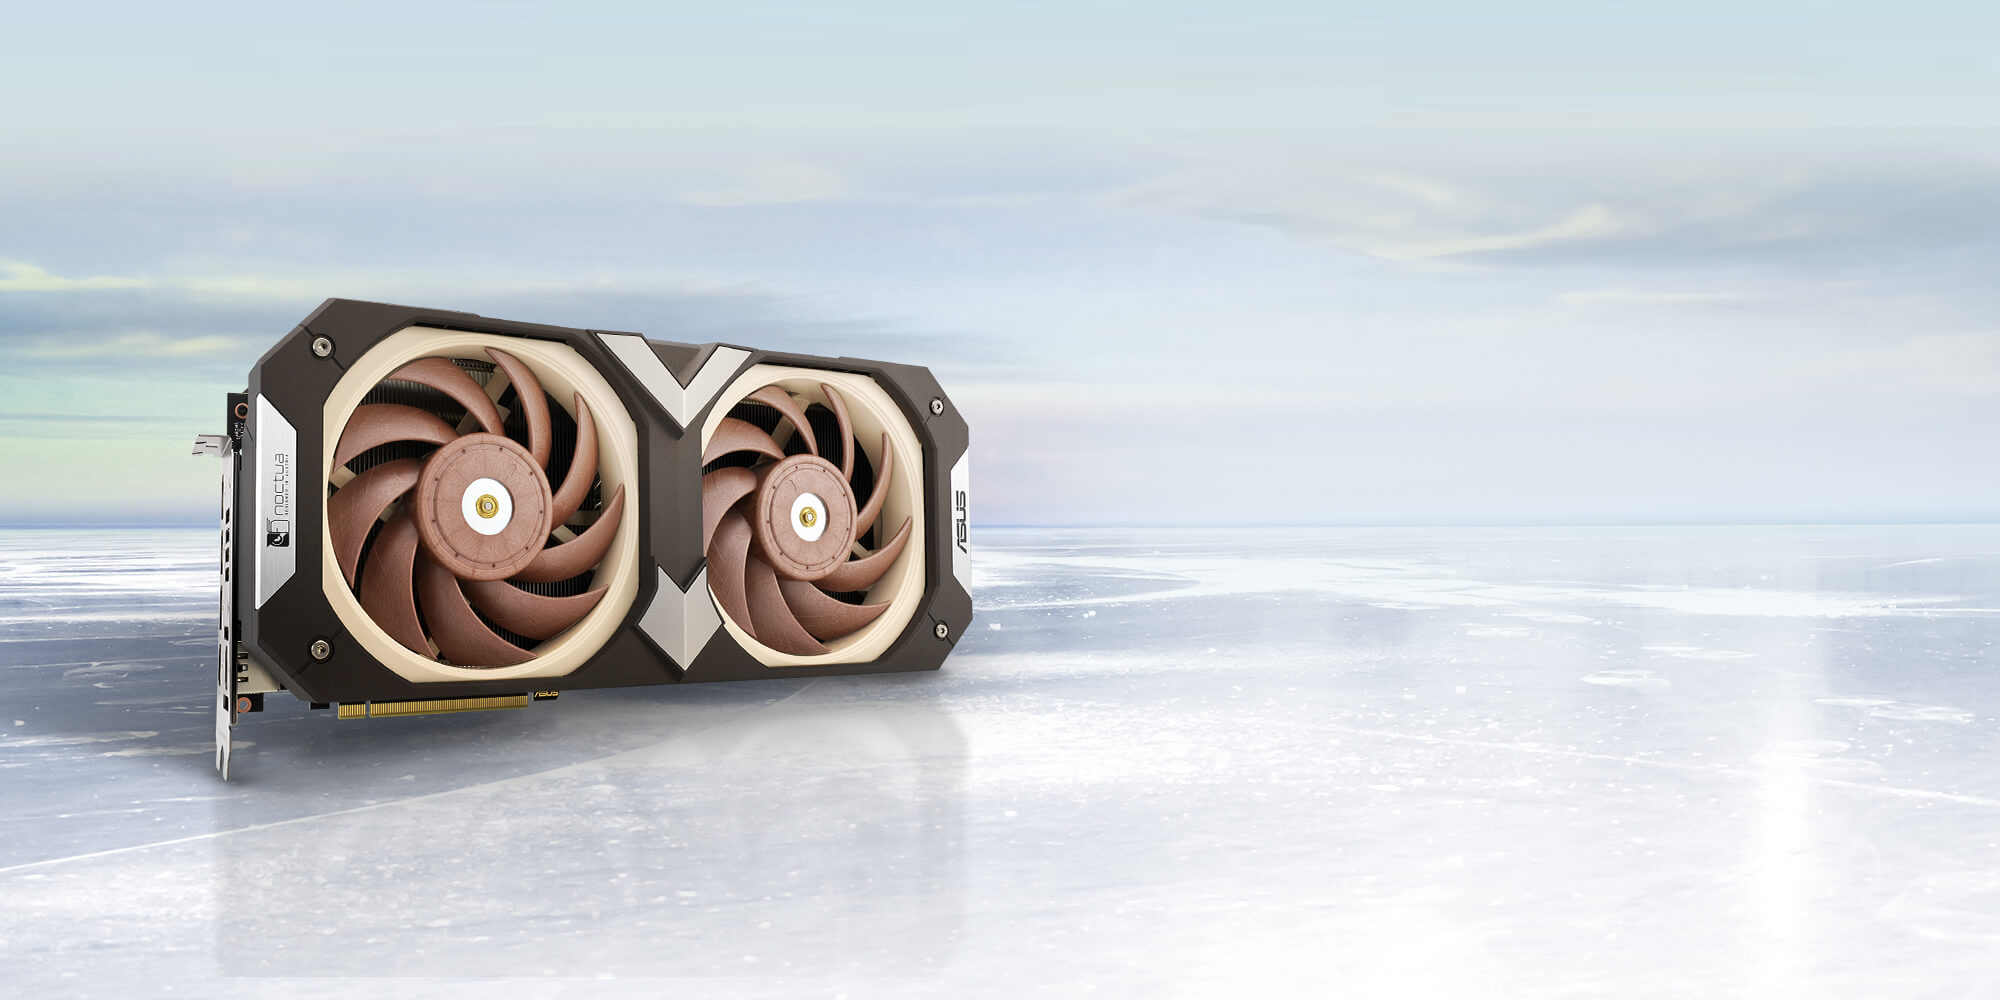 ASUS GeForce RTX 3080 Noctua Edition Graphics Card standing on a sheet of ice.